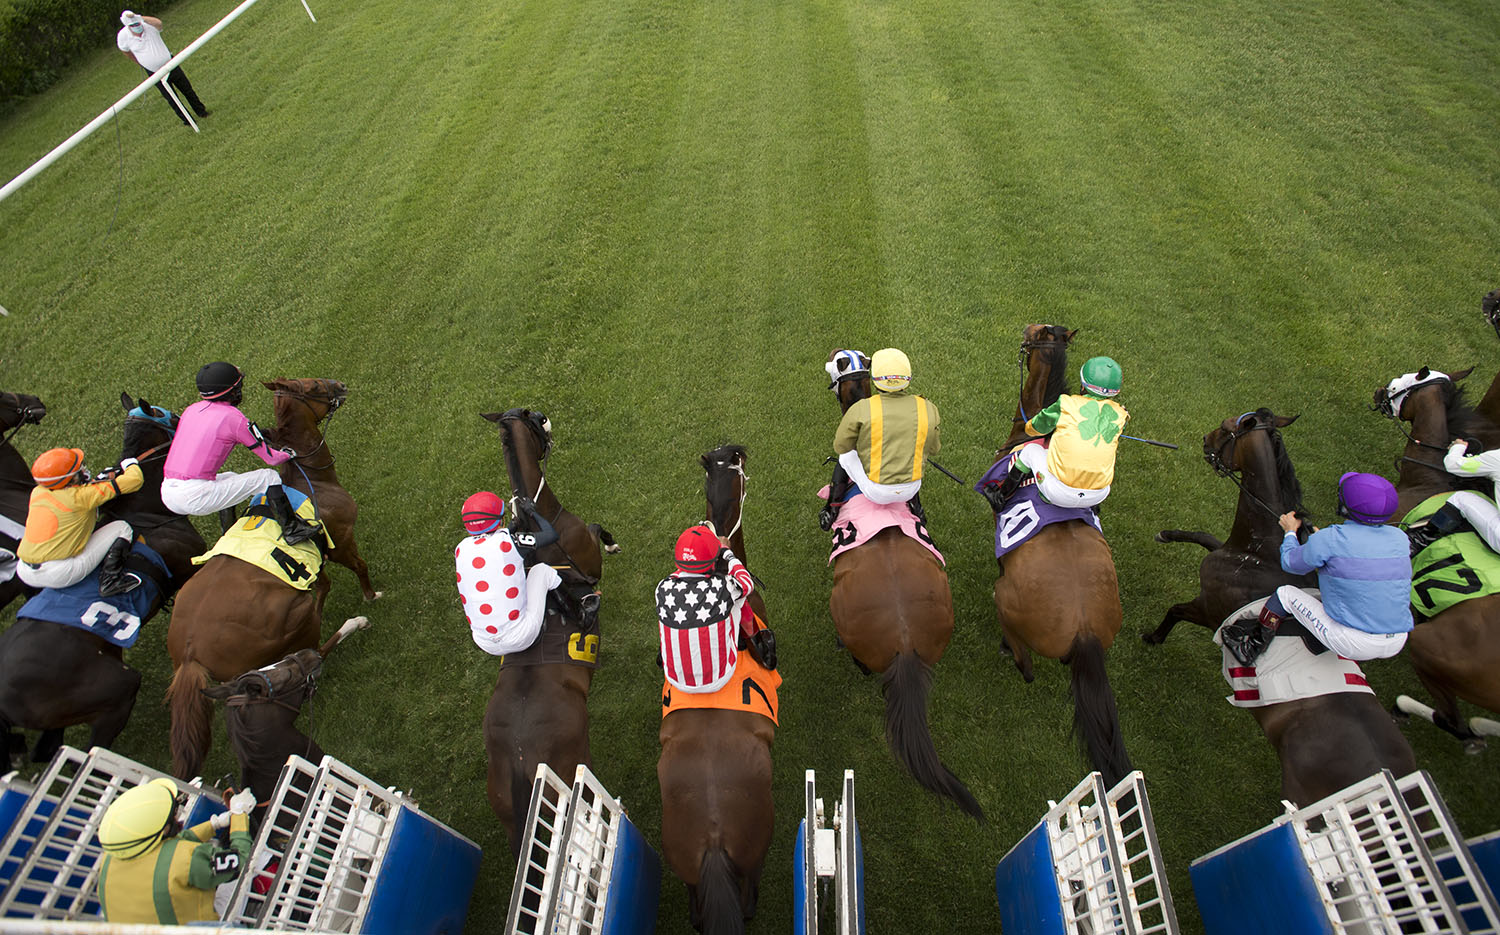 Post time changes for live Thoroughbred racing at Woodbine